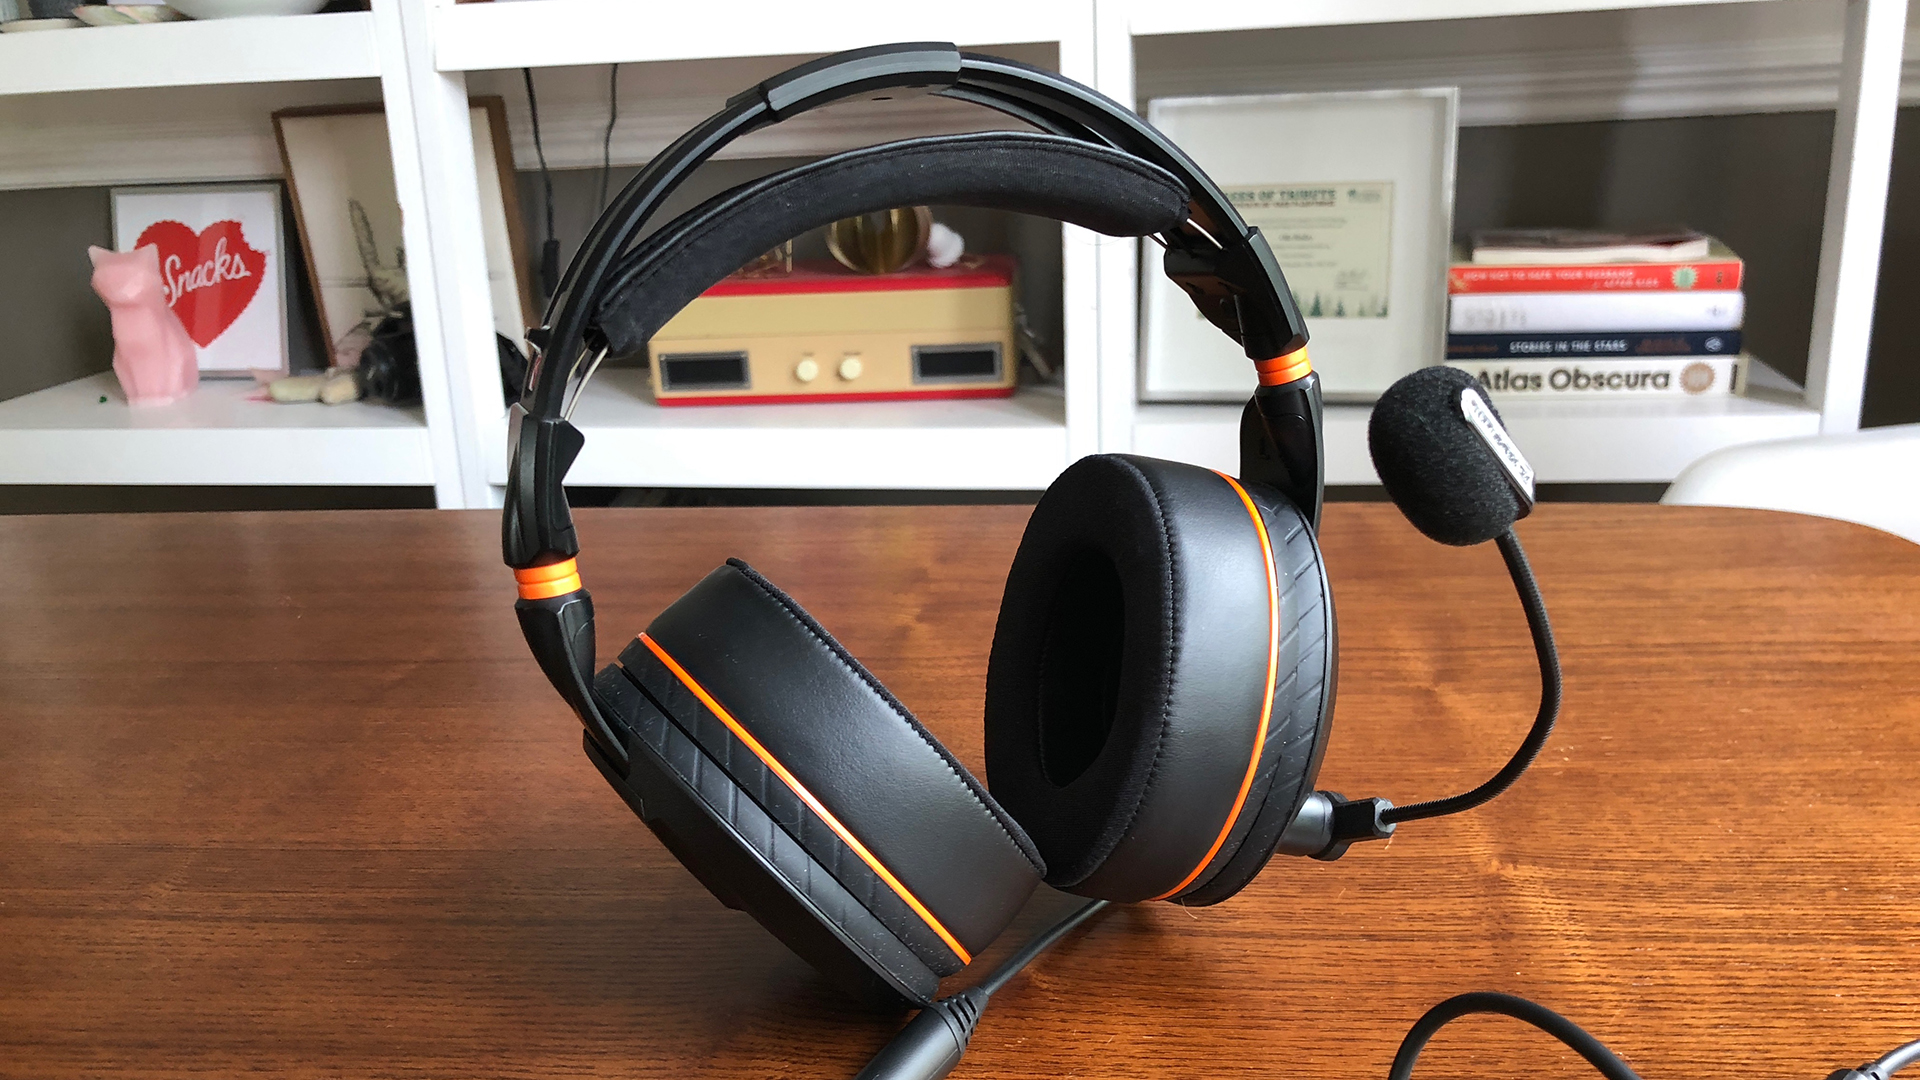 The best PC gaming headsets of 2019 2